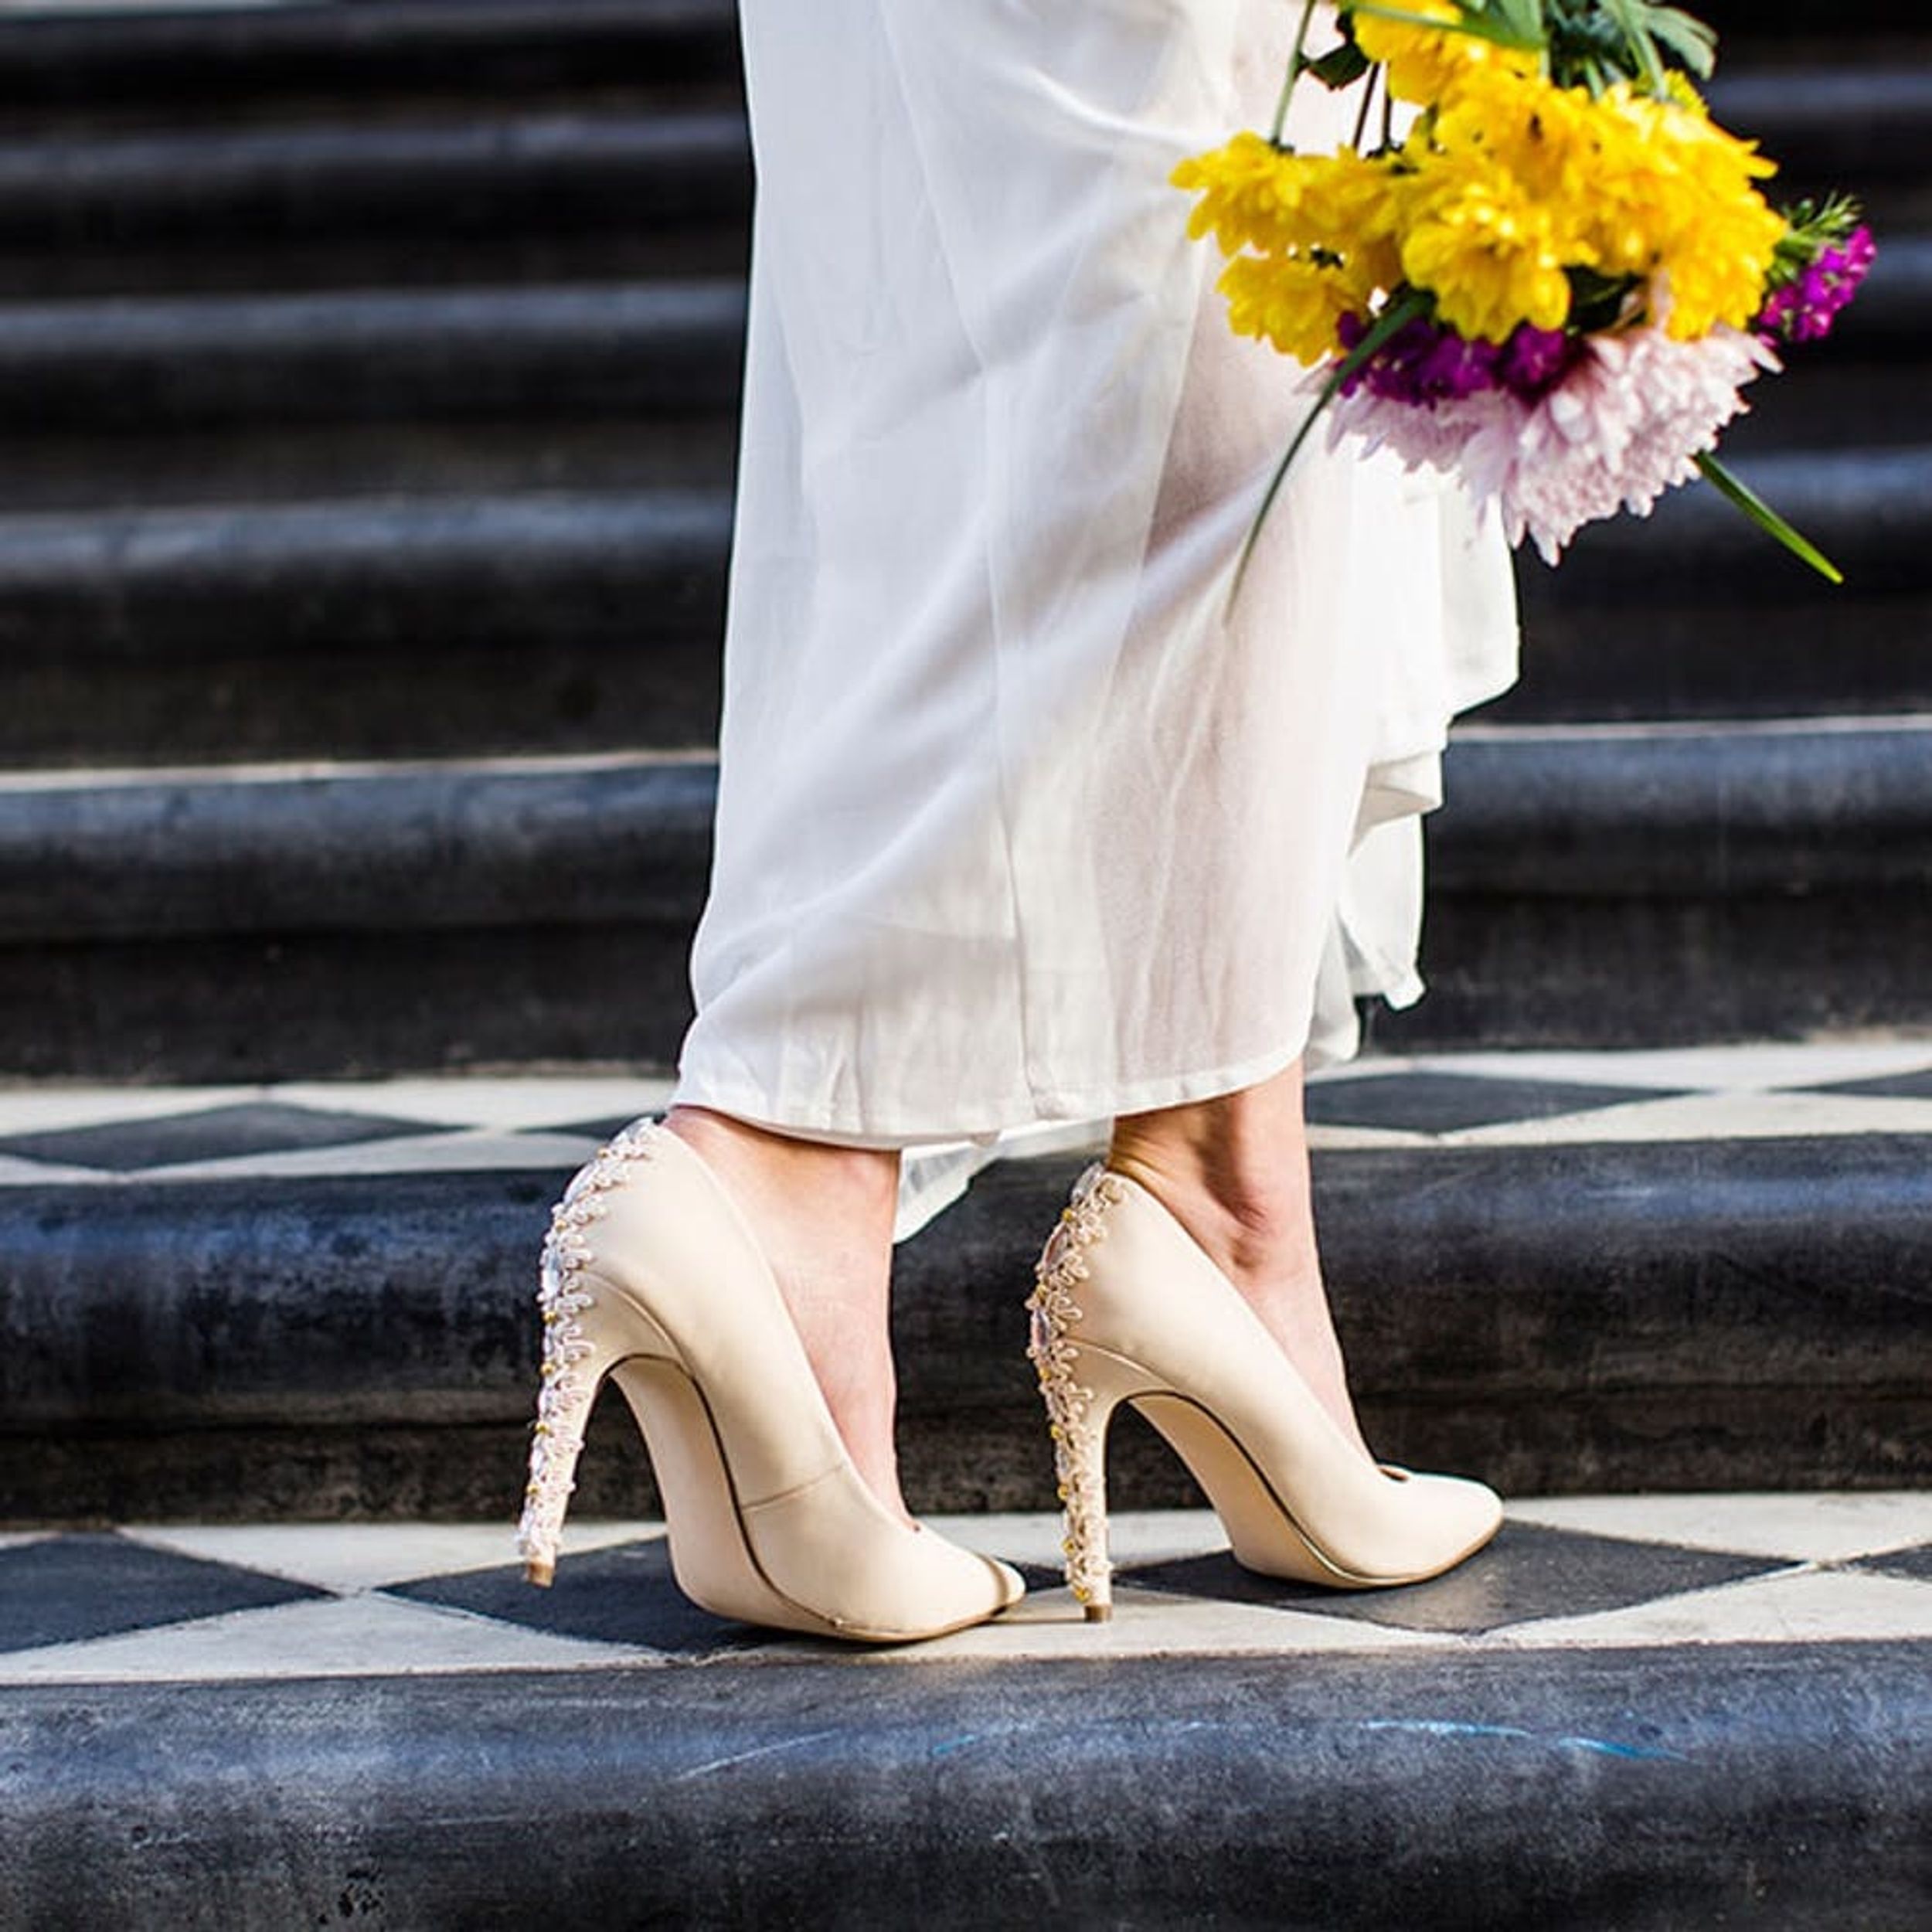 2 Quick + Easy DIY Ways to Customize Your Wedding Day Heels